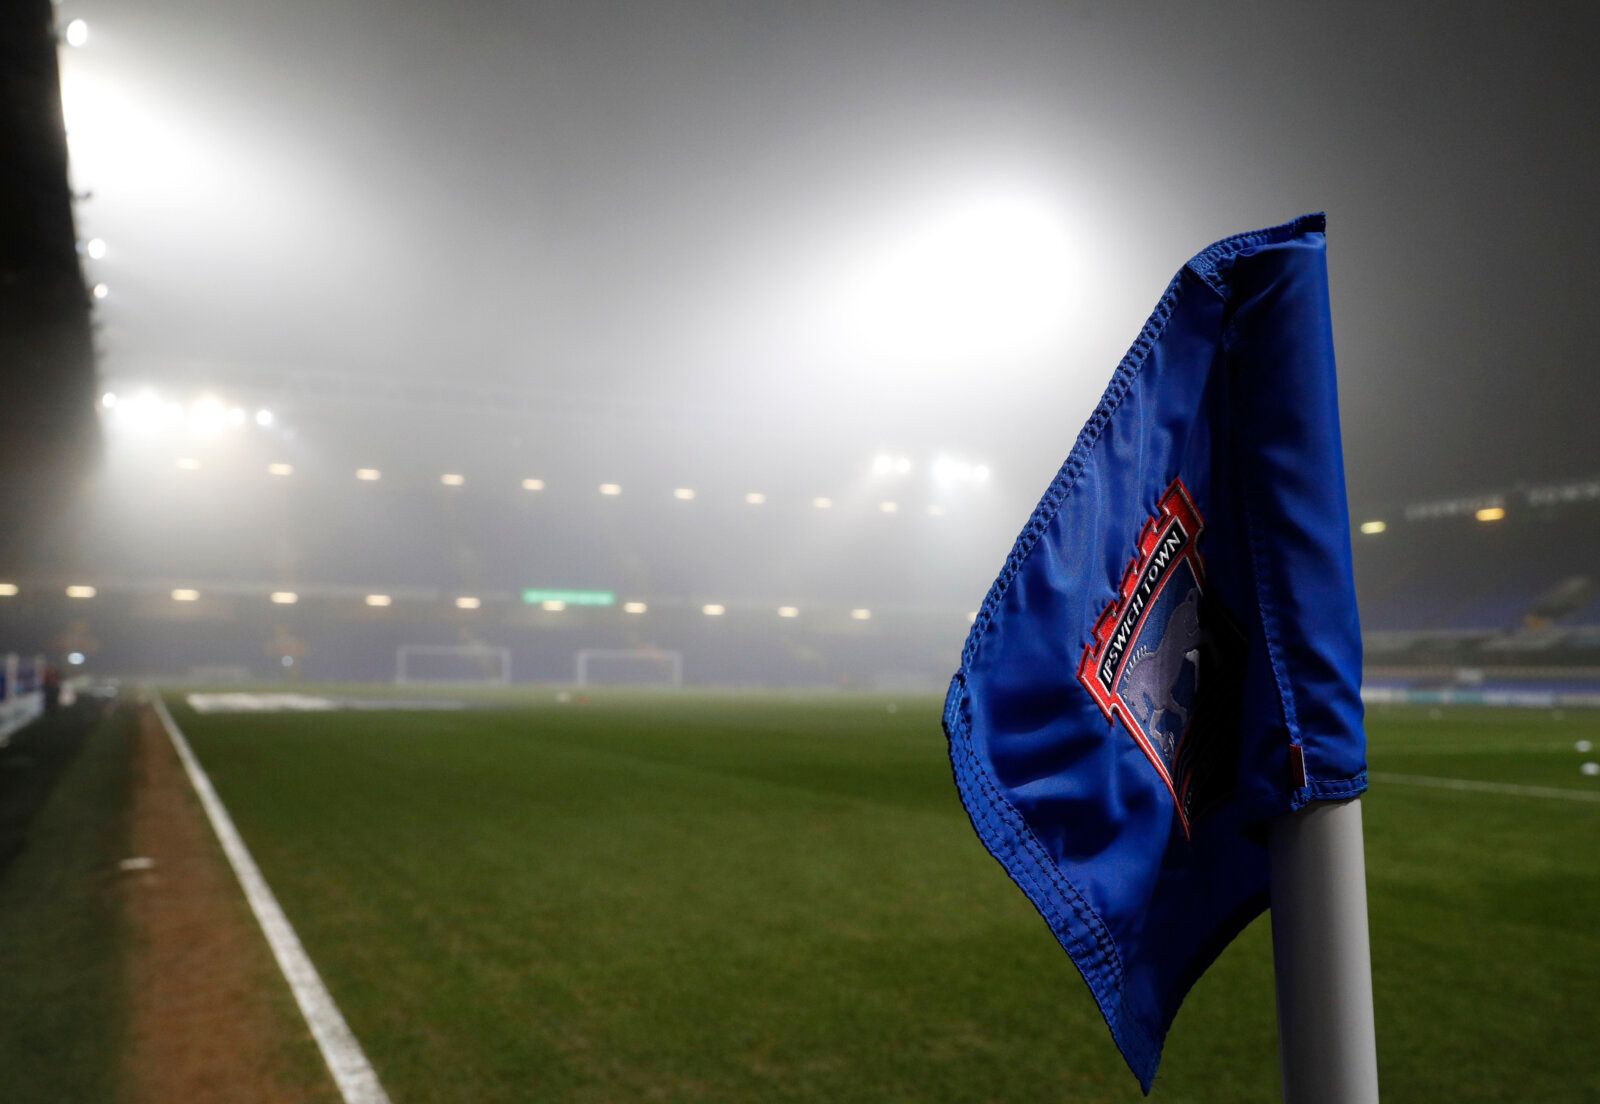 Britain Football Soccer - Ipswich Town v Bristol City - Sky Bet Championship - Portman Road - 30/12/16 General view of fog before the match  Mandatory Credit: Action Images / John Sibley Livepic EDITORIAL USE ONLY. No use with unauthorized audio, video, data, fixture lists, club/league logos or 